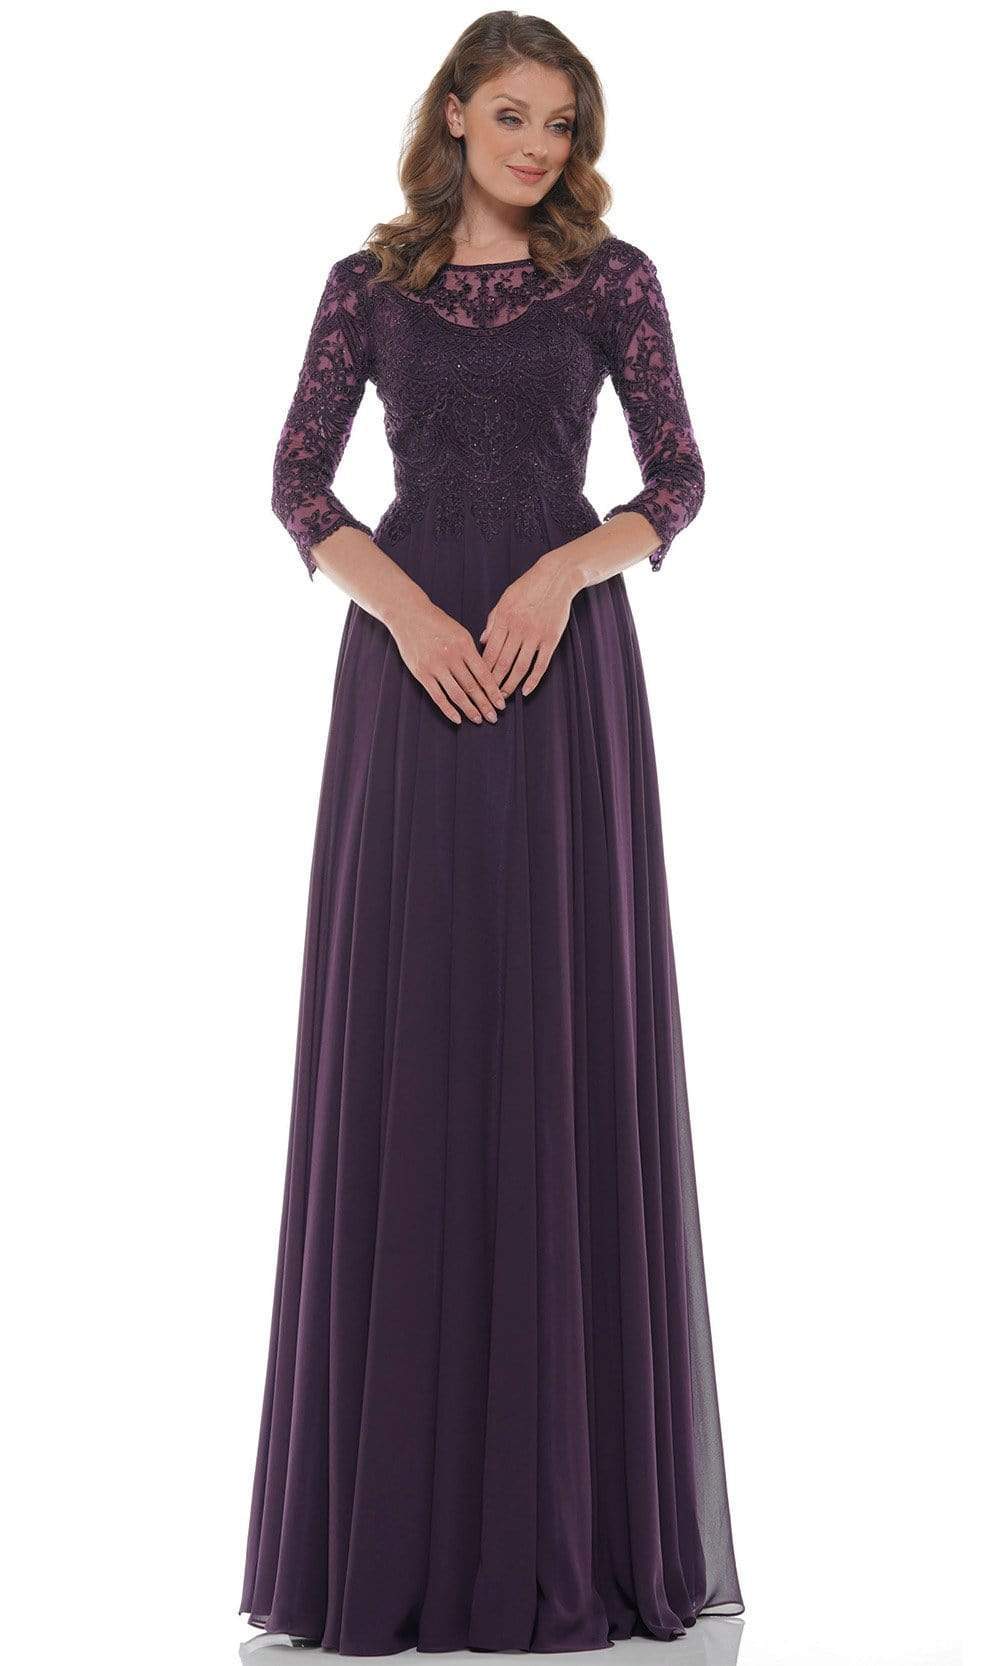 Marsoni by Colors - M238SL Embroidered Bodice Chiffon A-Line Gown Mother of the Bride Dresses 4 / Eggplant